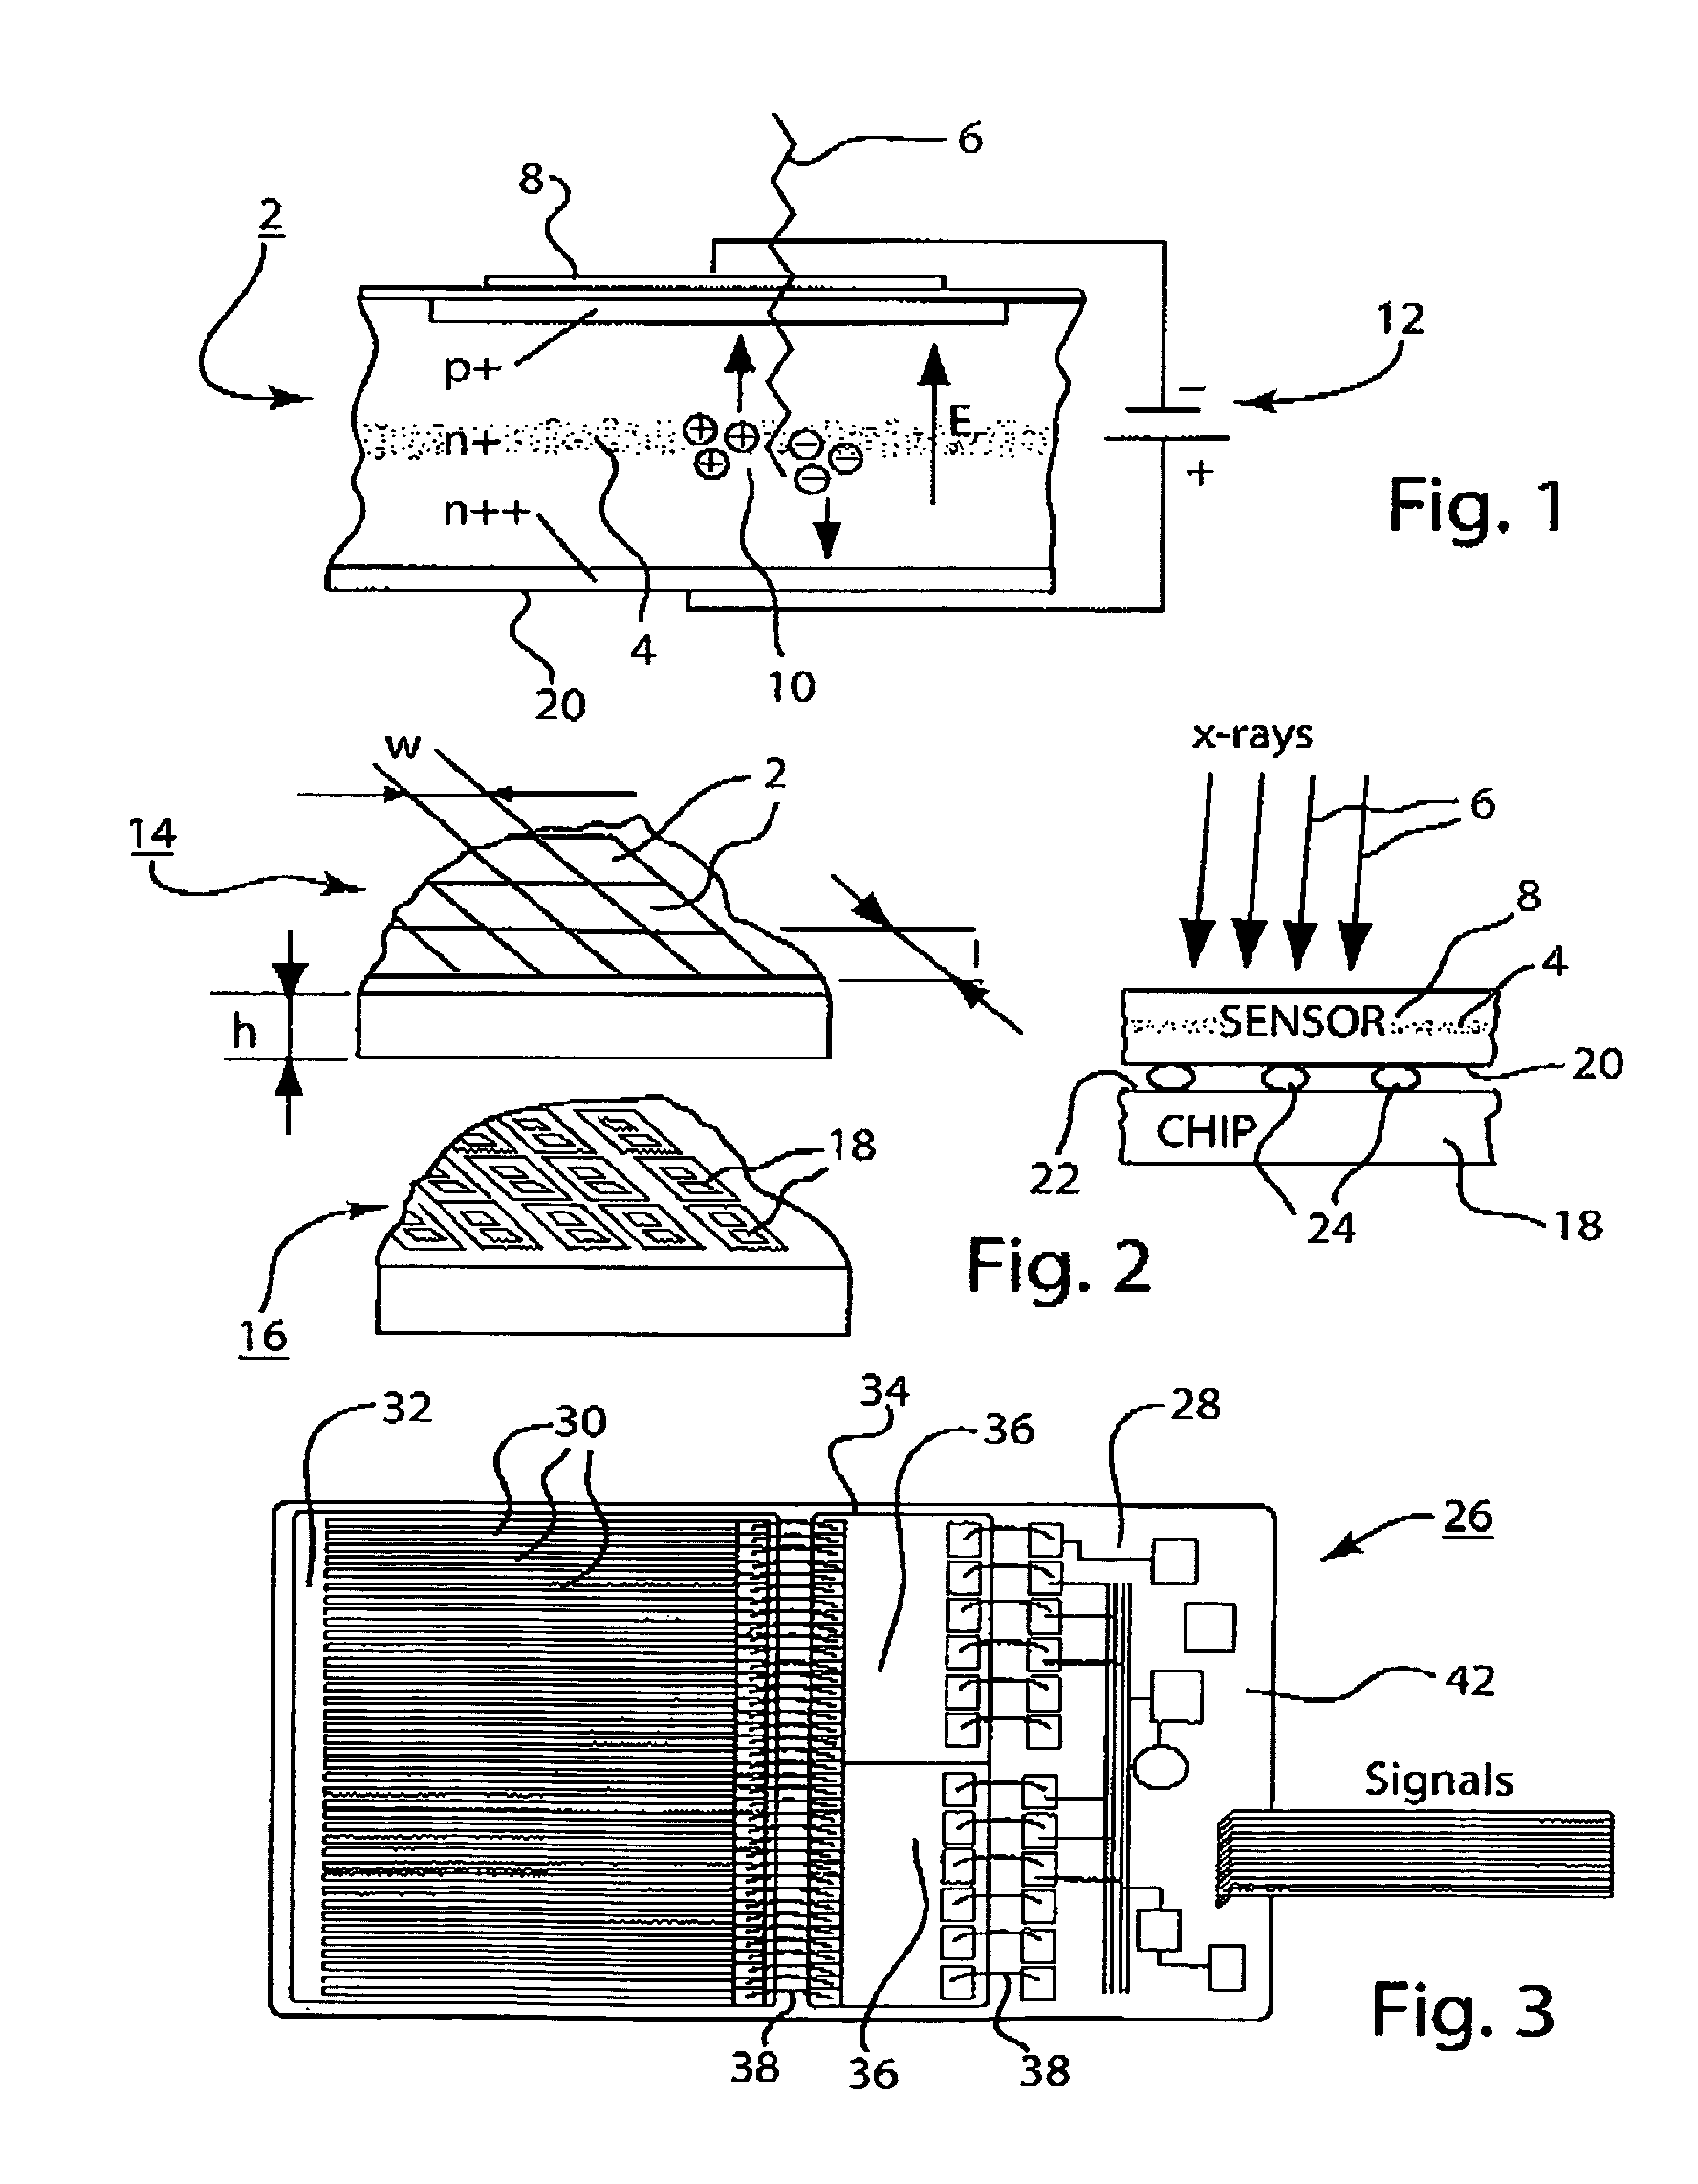 Photon counting imaging device